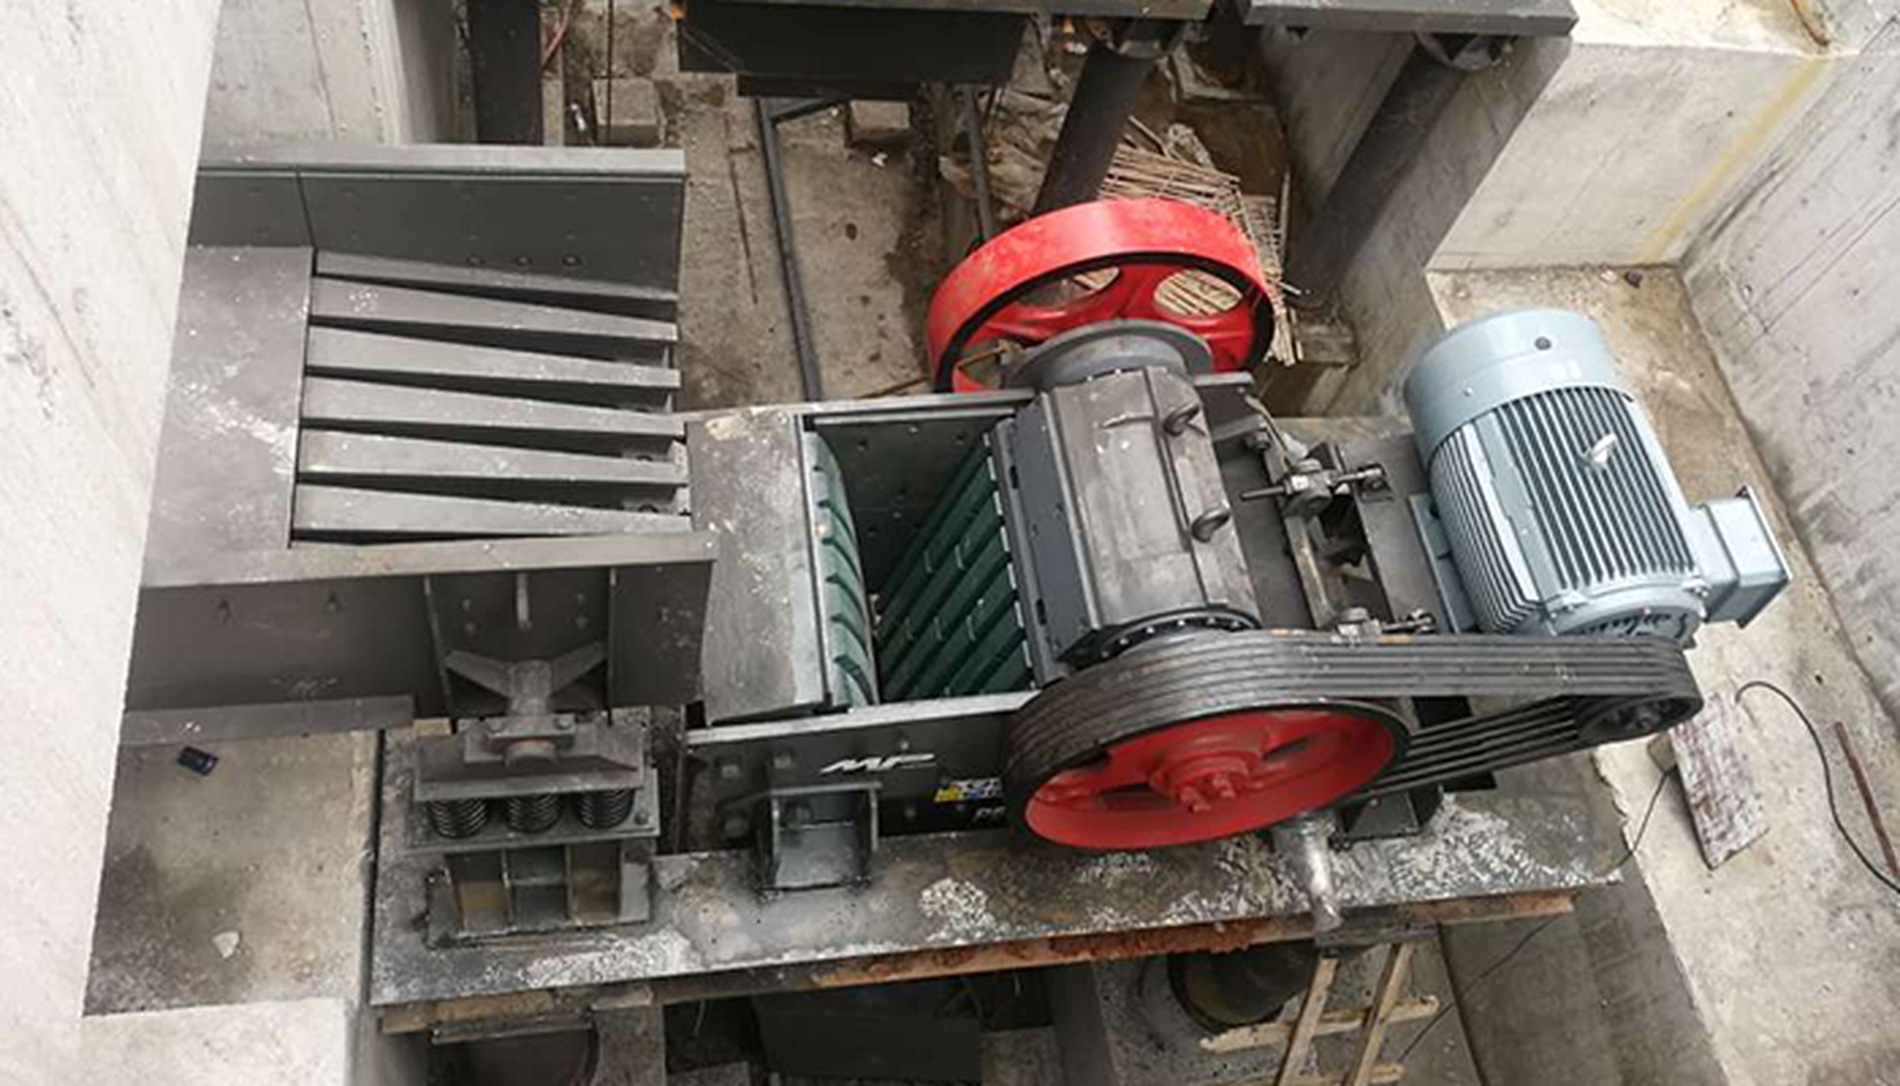 ①Photo：
②Description
Material: Granite
Capacity: 250-300T/H
Feed Size: <700mm
End Product Size:0-5mm, 5-10mm, 10-20mm
③Procedure：
Material fed by grizzly feeder, the wastes screened by the rods, 20-100mm material into transit bin, ＞100mm material crushed by primary jaw crusher then into transit bin. Then the material in the transit bin get into cone crusher for secondary crushing and screened by inclined screen get the 0-5-10-20mm product. The material ＞20mm will feed to cone crusher for final crushing and screened get 0-5-10-20mm end product.
④Equipments:
CC series cone crusher, PEV series jaw crusher, VGF series grizzly feeder, YK series inclined screen
